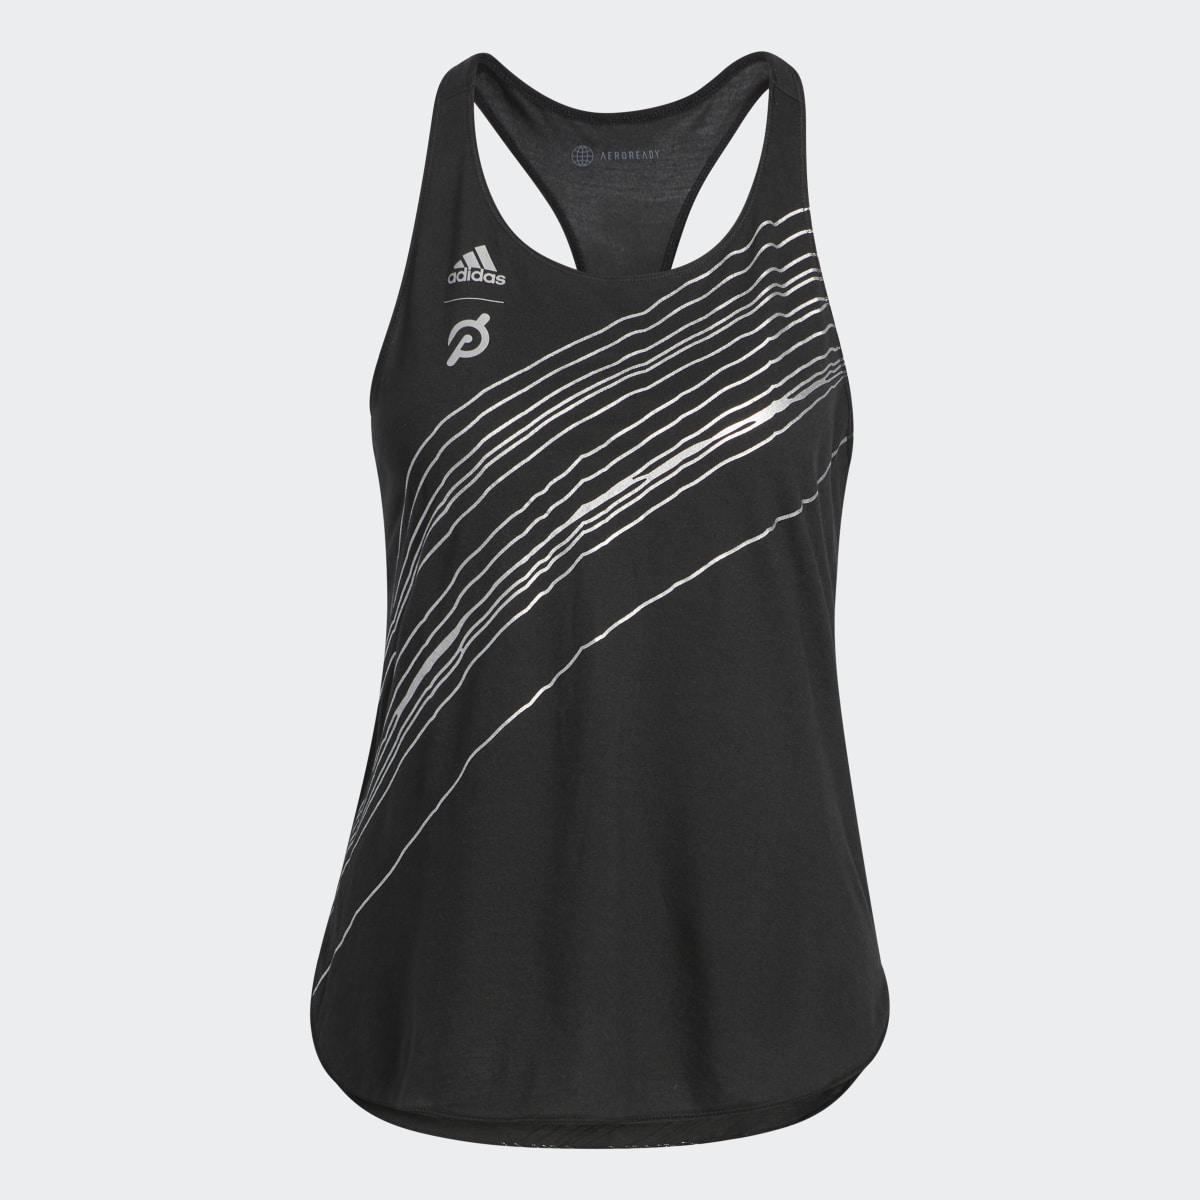 Adidas Capable of Greatness Training Tank Top. 5